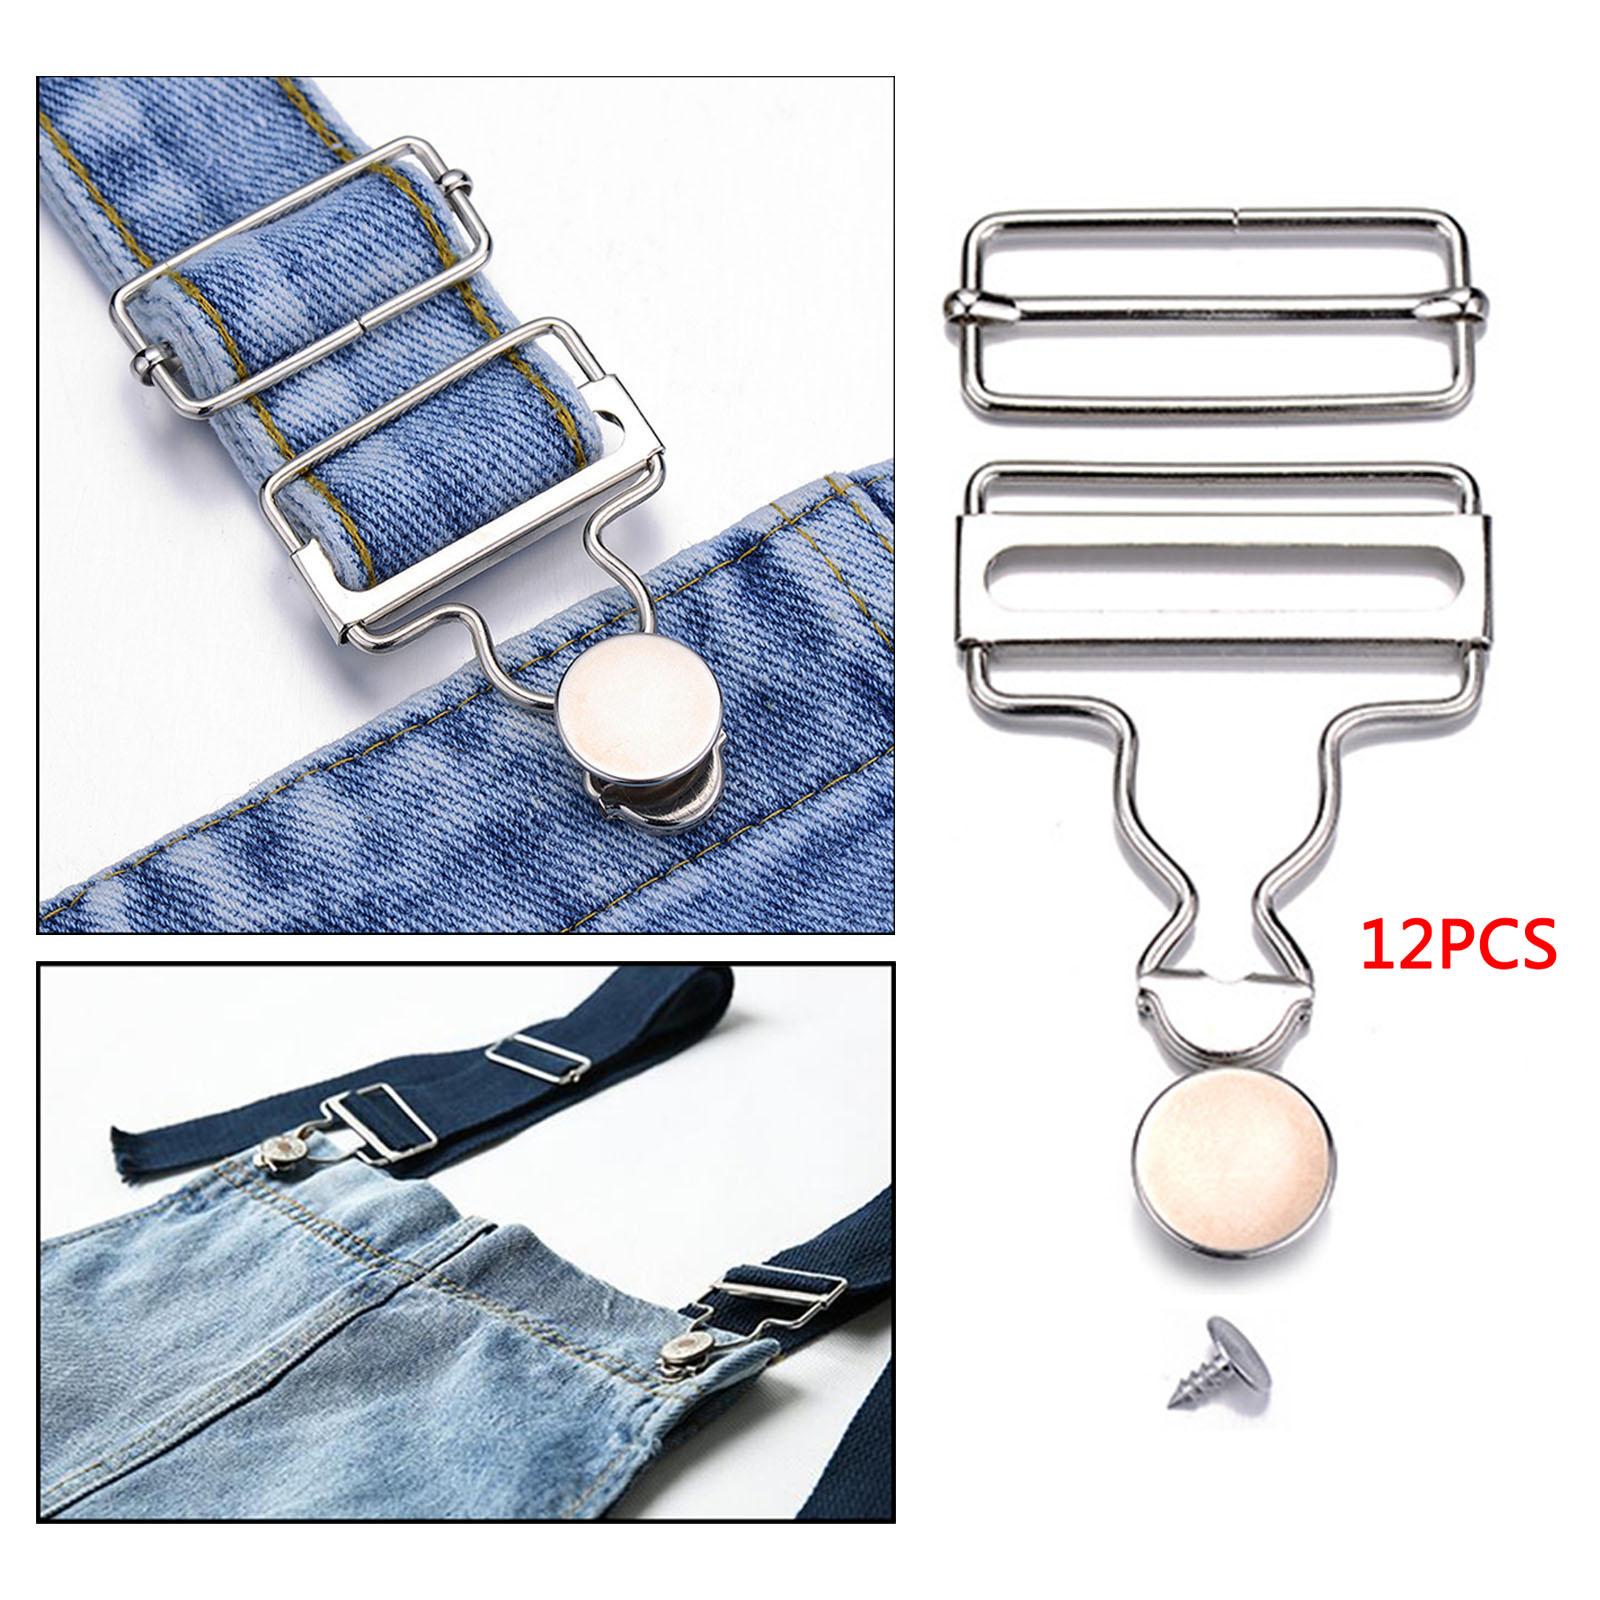 12 Sets Overall Buckles Metal Suspender Replacement Buckles with Rectangle  Buckle Slider And Buttons for Overalls Bib Pants Jeans 3.2cm 